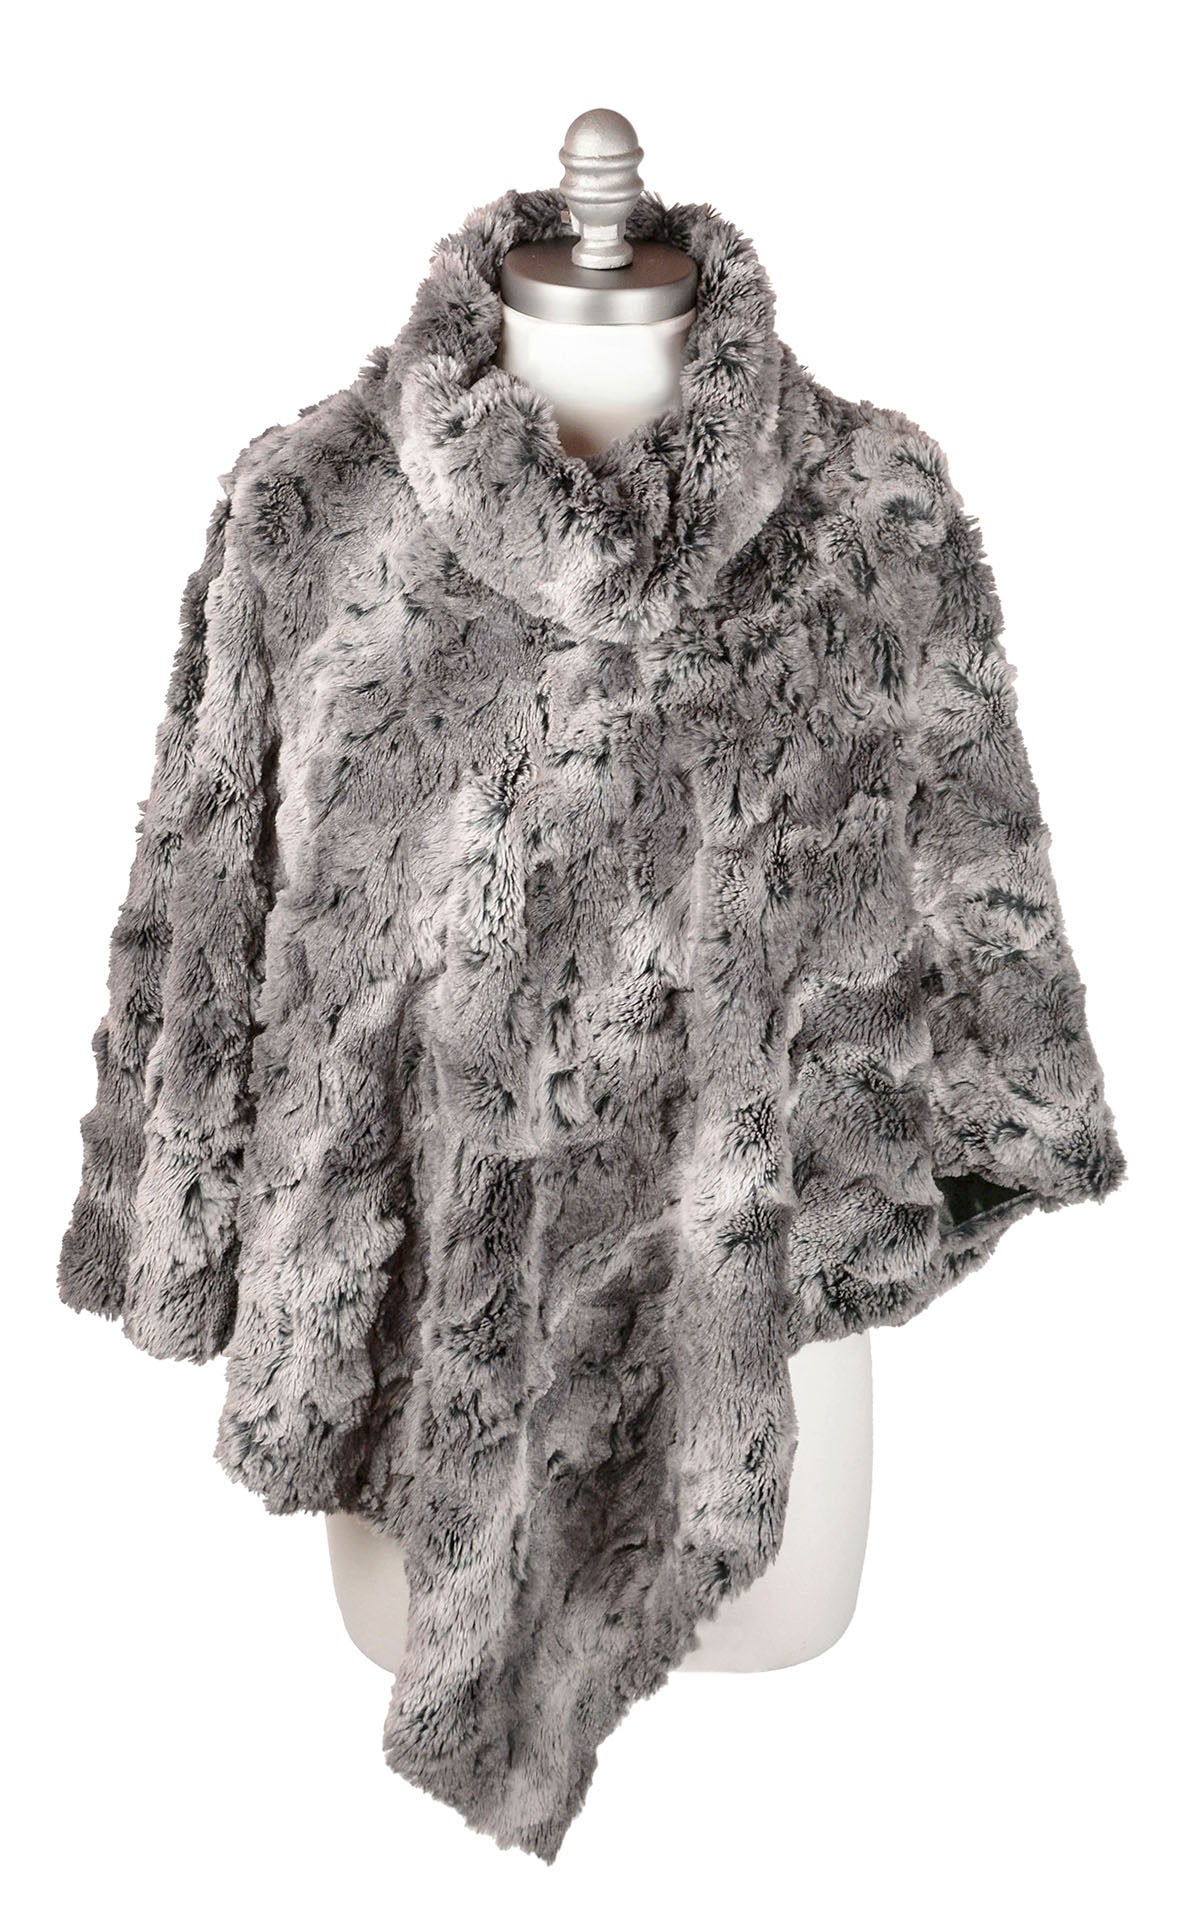 Poncho - Luxury Faux Fur in Seattle Sky(Sold Out!)